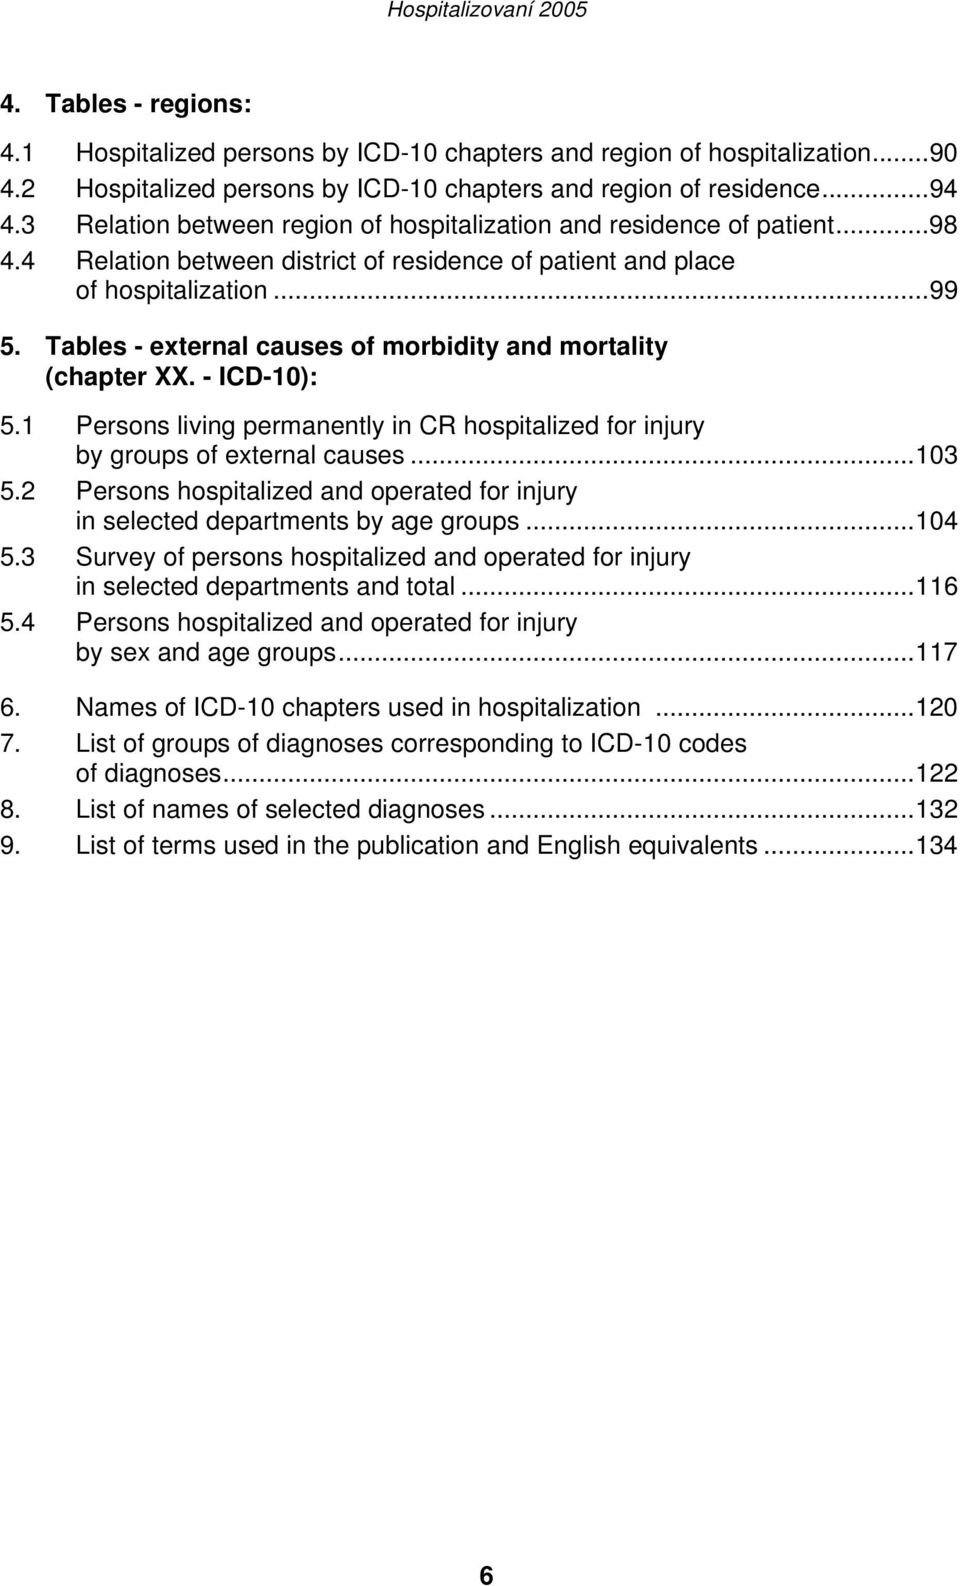 Tables - external causes of morbidity and mortality (chapter XX. - ICD-10): 5.1 Persons living permanently in CR hospitalized for injury by groups of external causes...103 5.